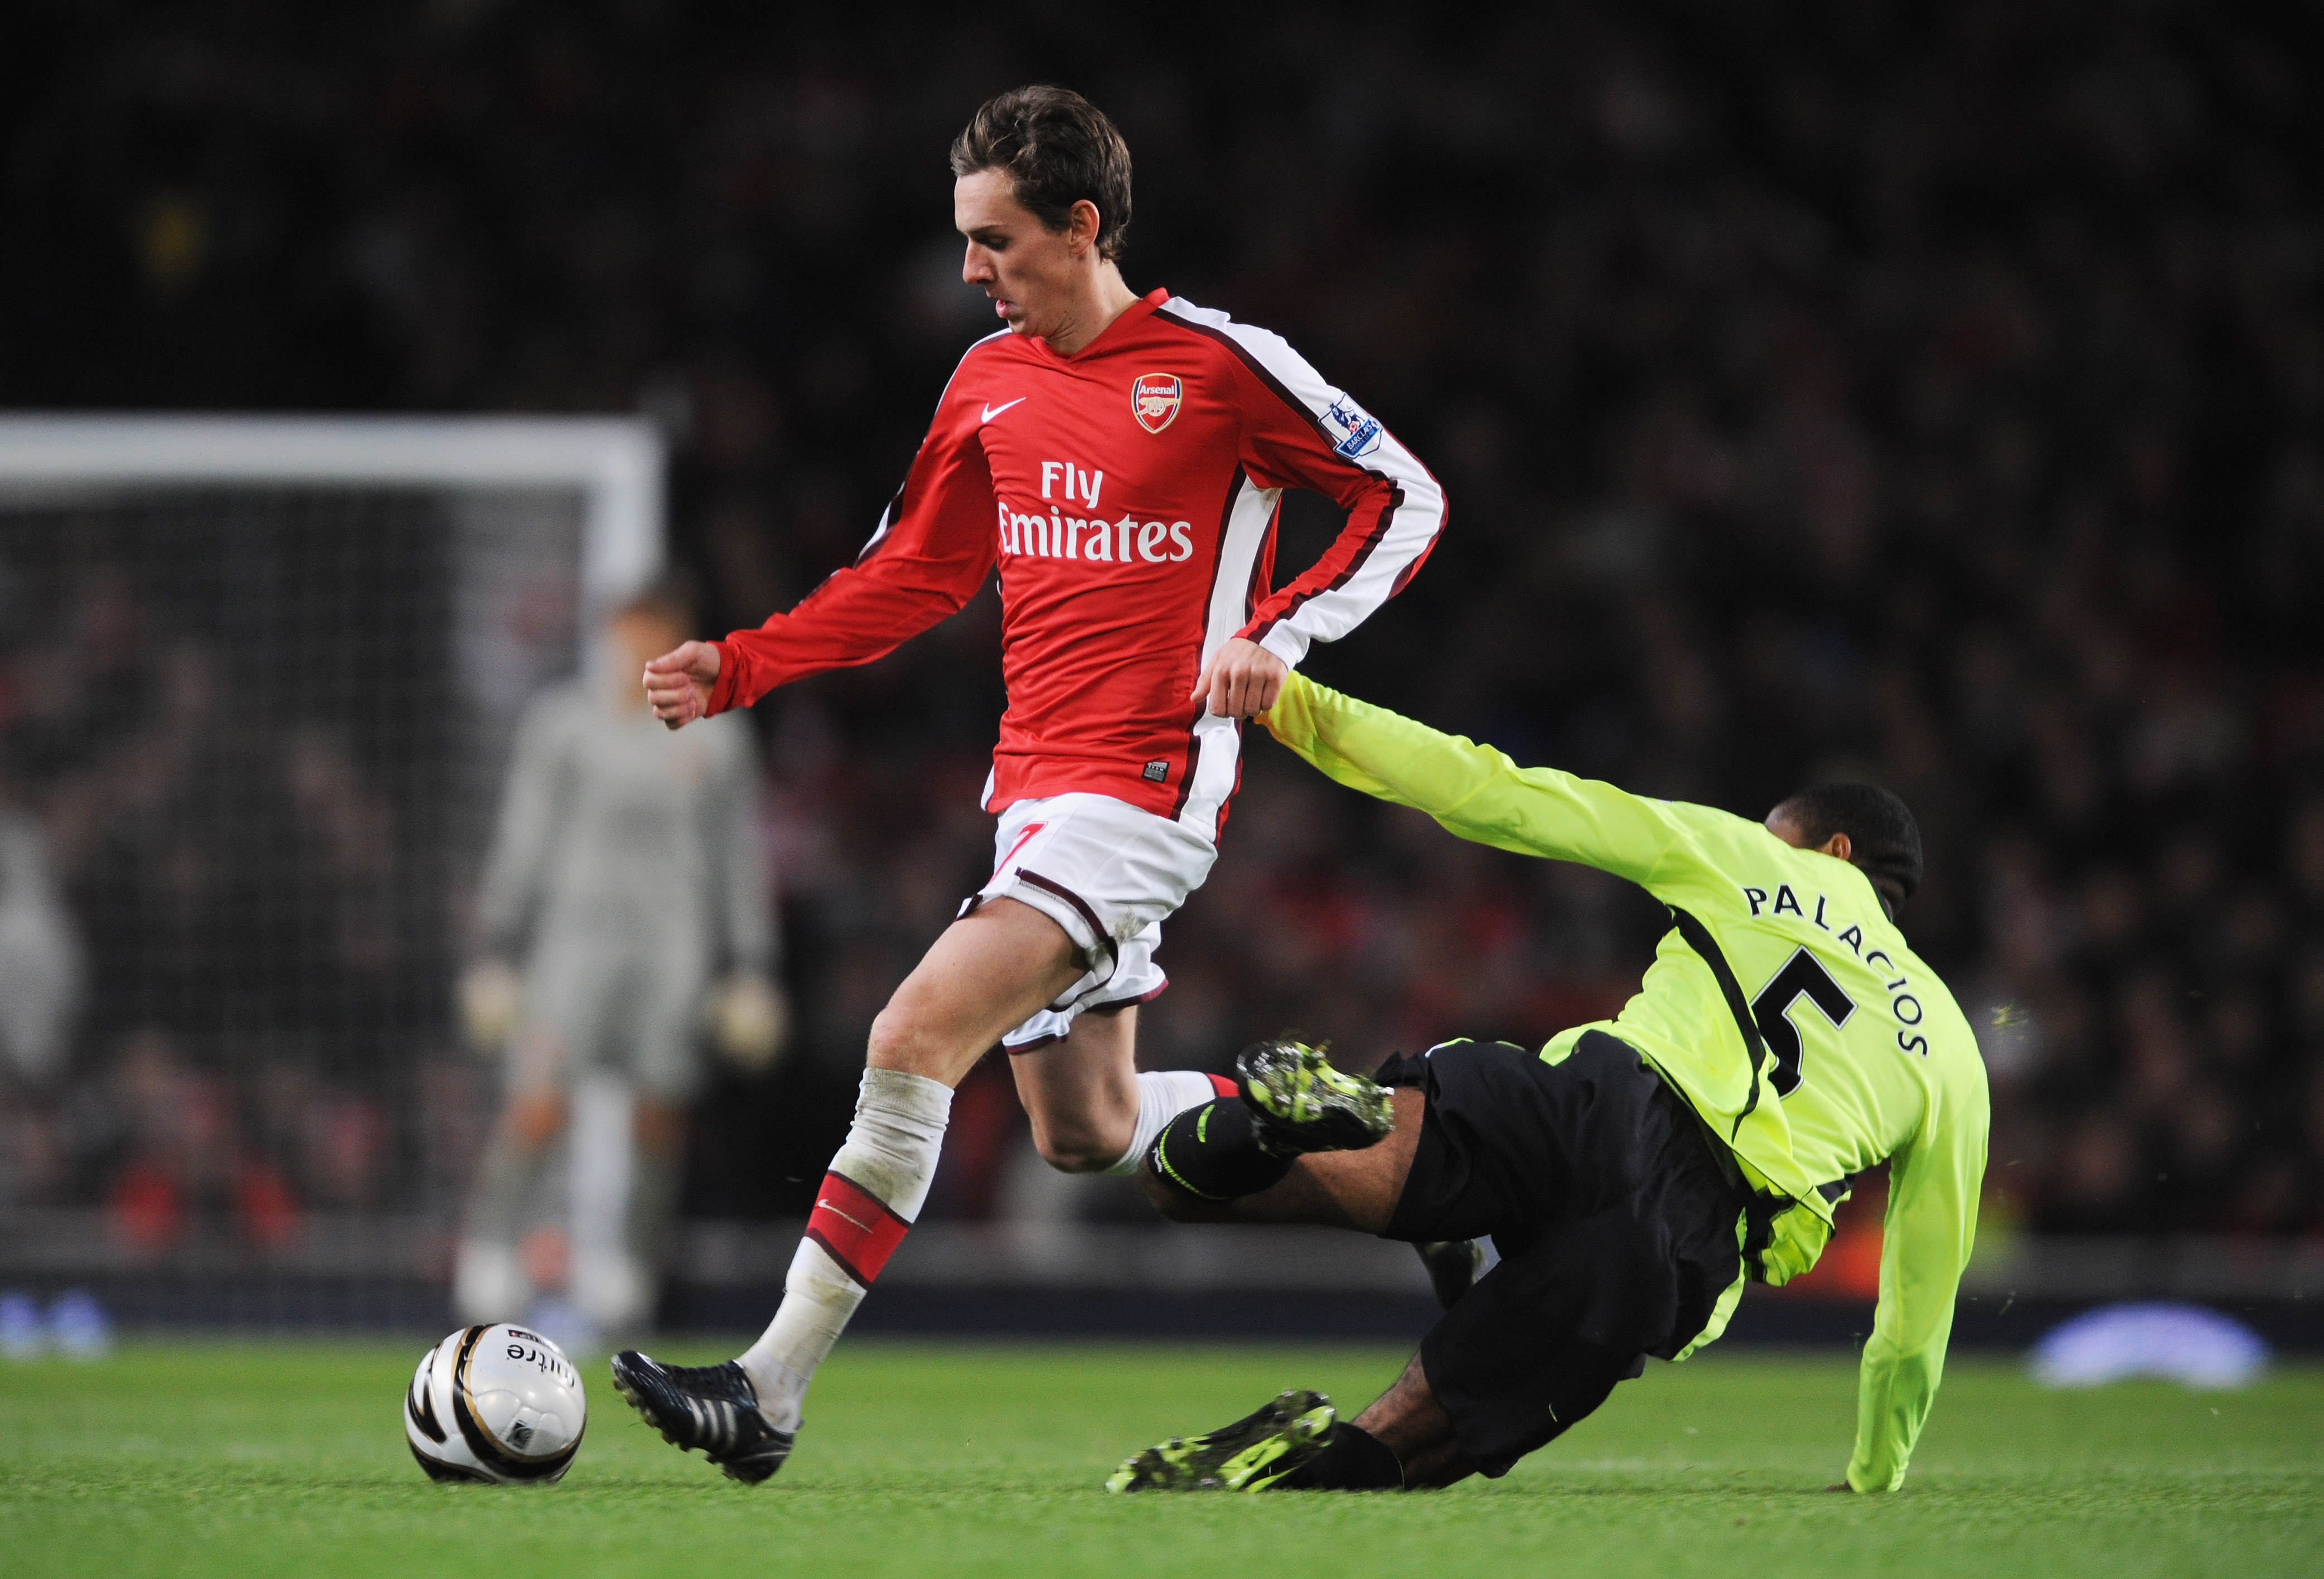 LONDON - NOVEMBER 11:  Mark Randall (L) of Arsenal is tackled by Wilson Palacios of Wigan during the Carling Cup fourth round match between Arsenal and Wigan Athletic at the Emirates Stadium on November 11, 2008 in London, England.  (Photo by Shaun Botter